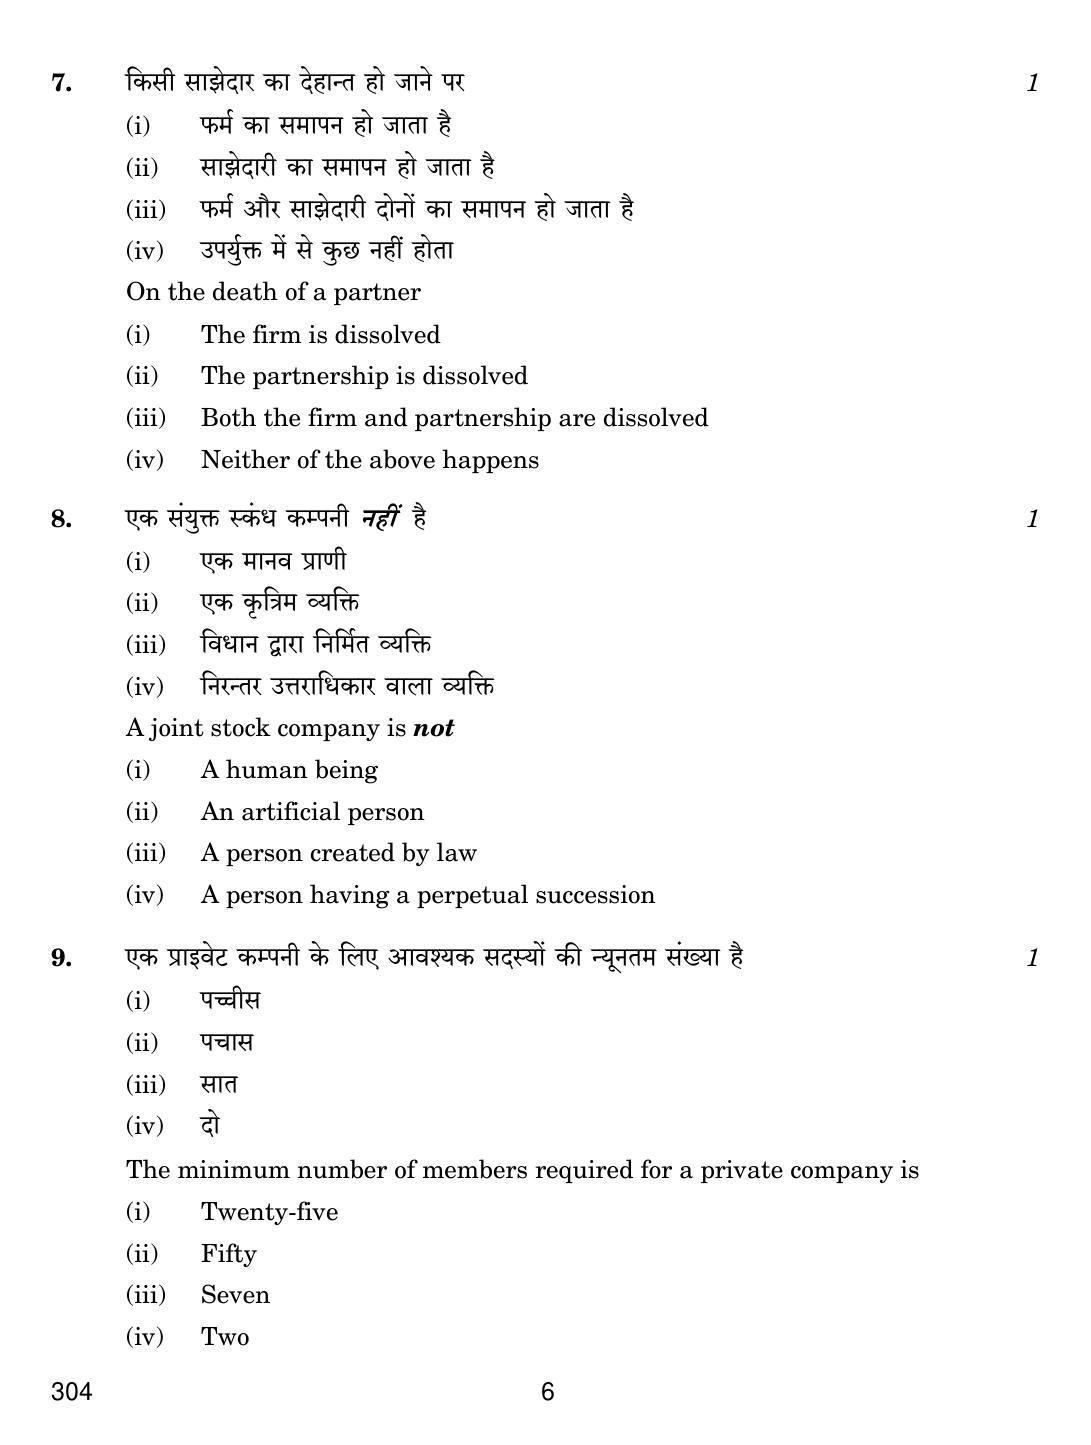 CBSE Class 12 304 FINANCIAL ACCOUNTING 2018 Question Paper - Page 6